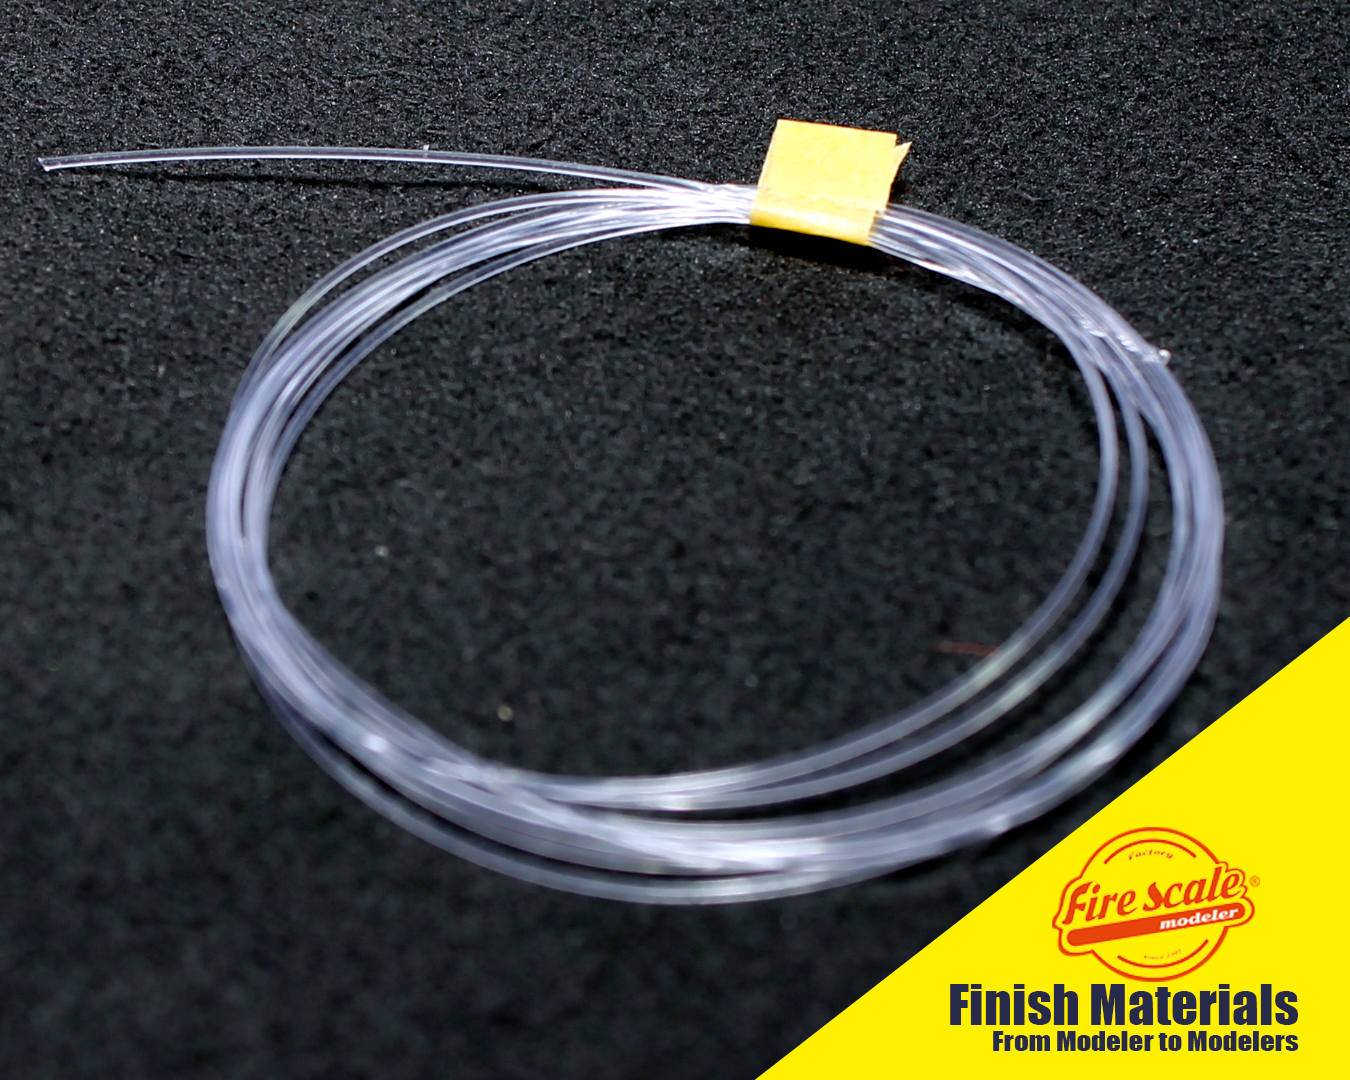 Clear Wire 0.2 mm